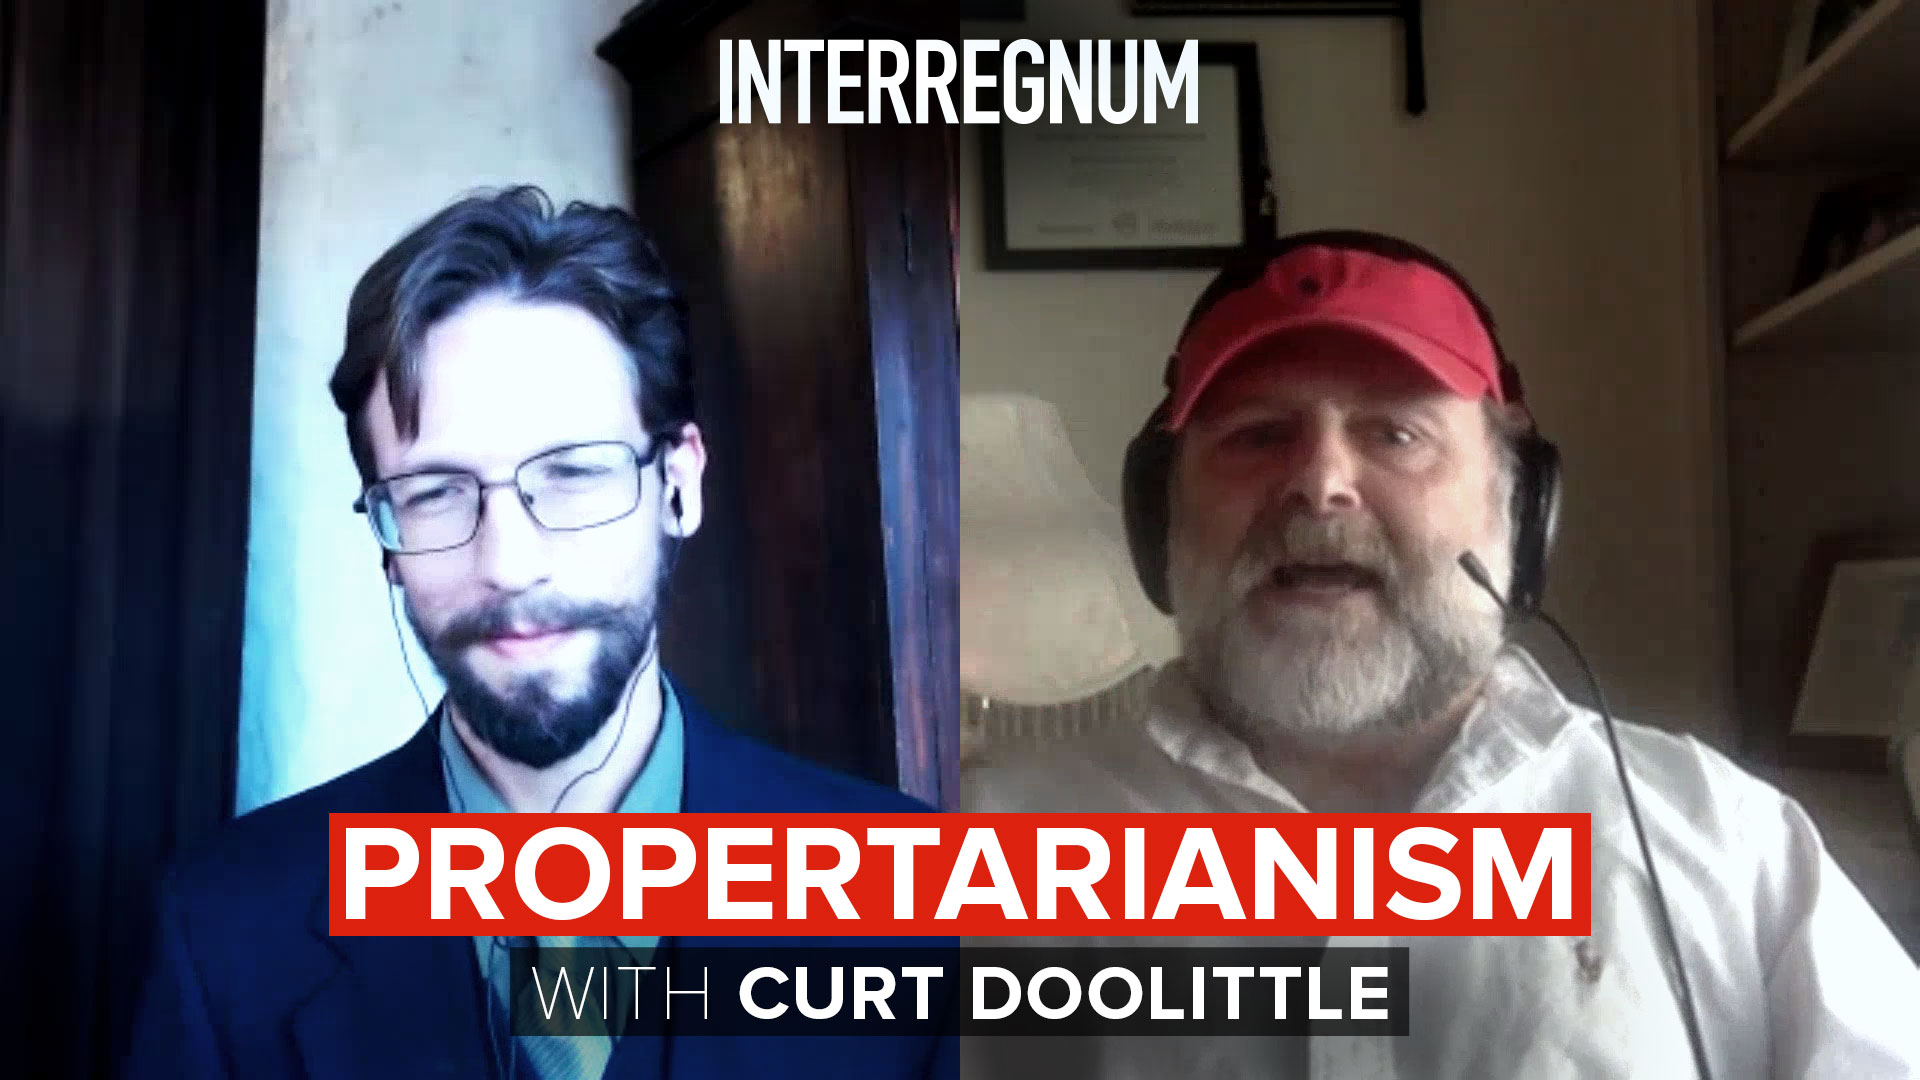 Propertarianism with Curt Doolittle